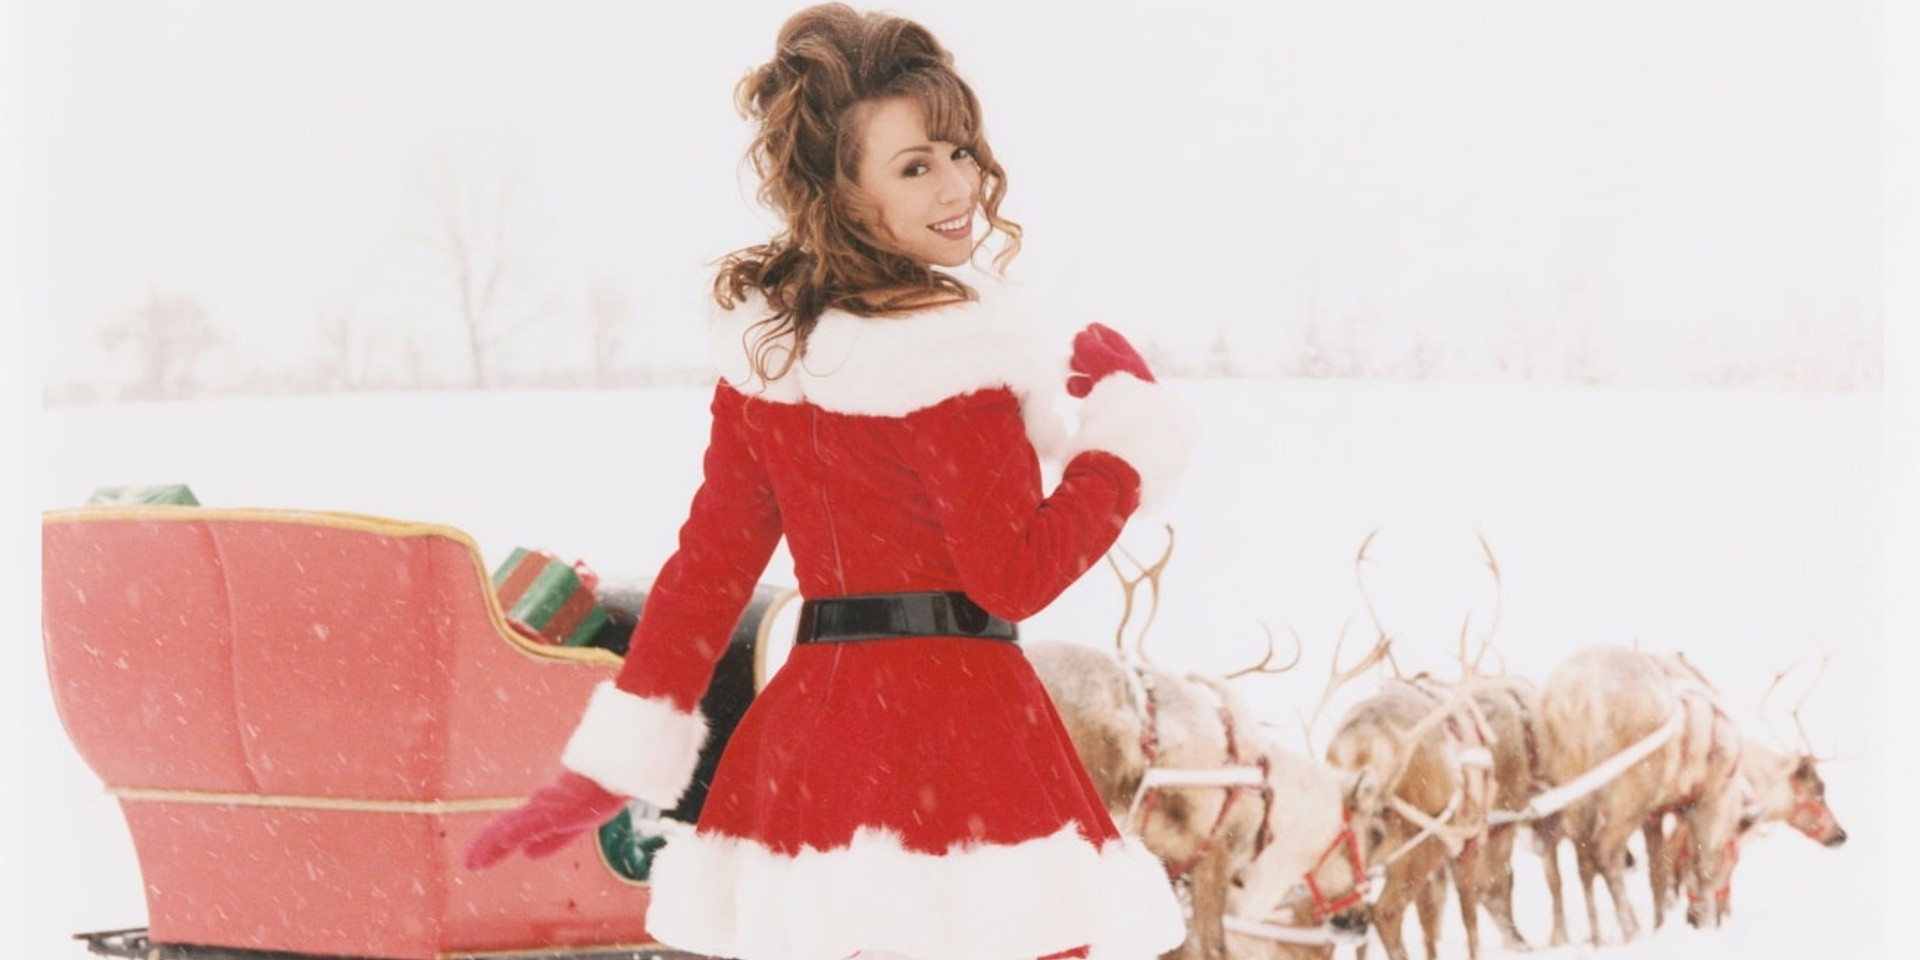 Mariah Carey's 'All I Want For Christmas Is You' finally hits No. 1 25 years after its debut